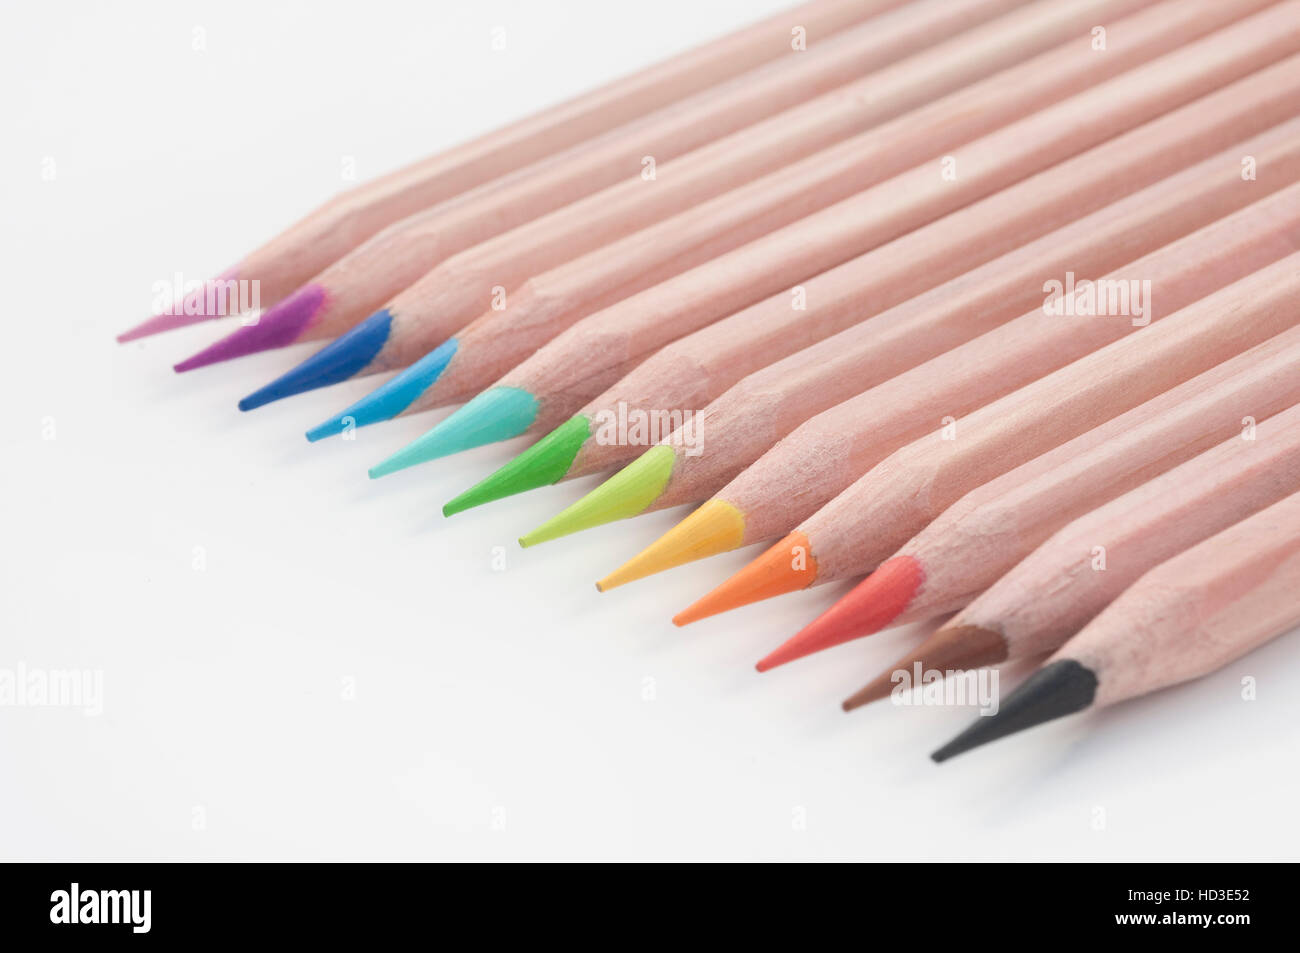 Colouring pencils lined up together Stock Photo